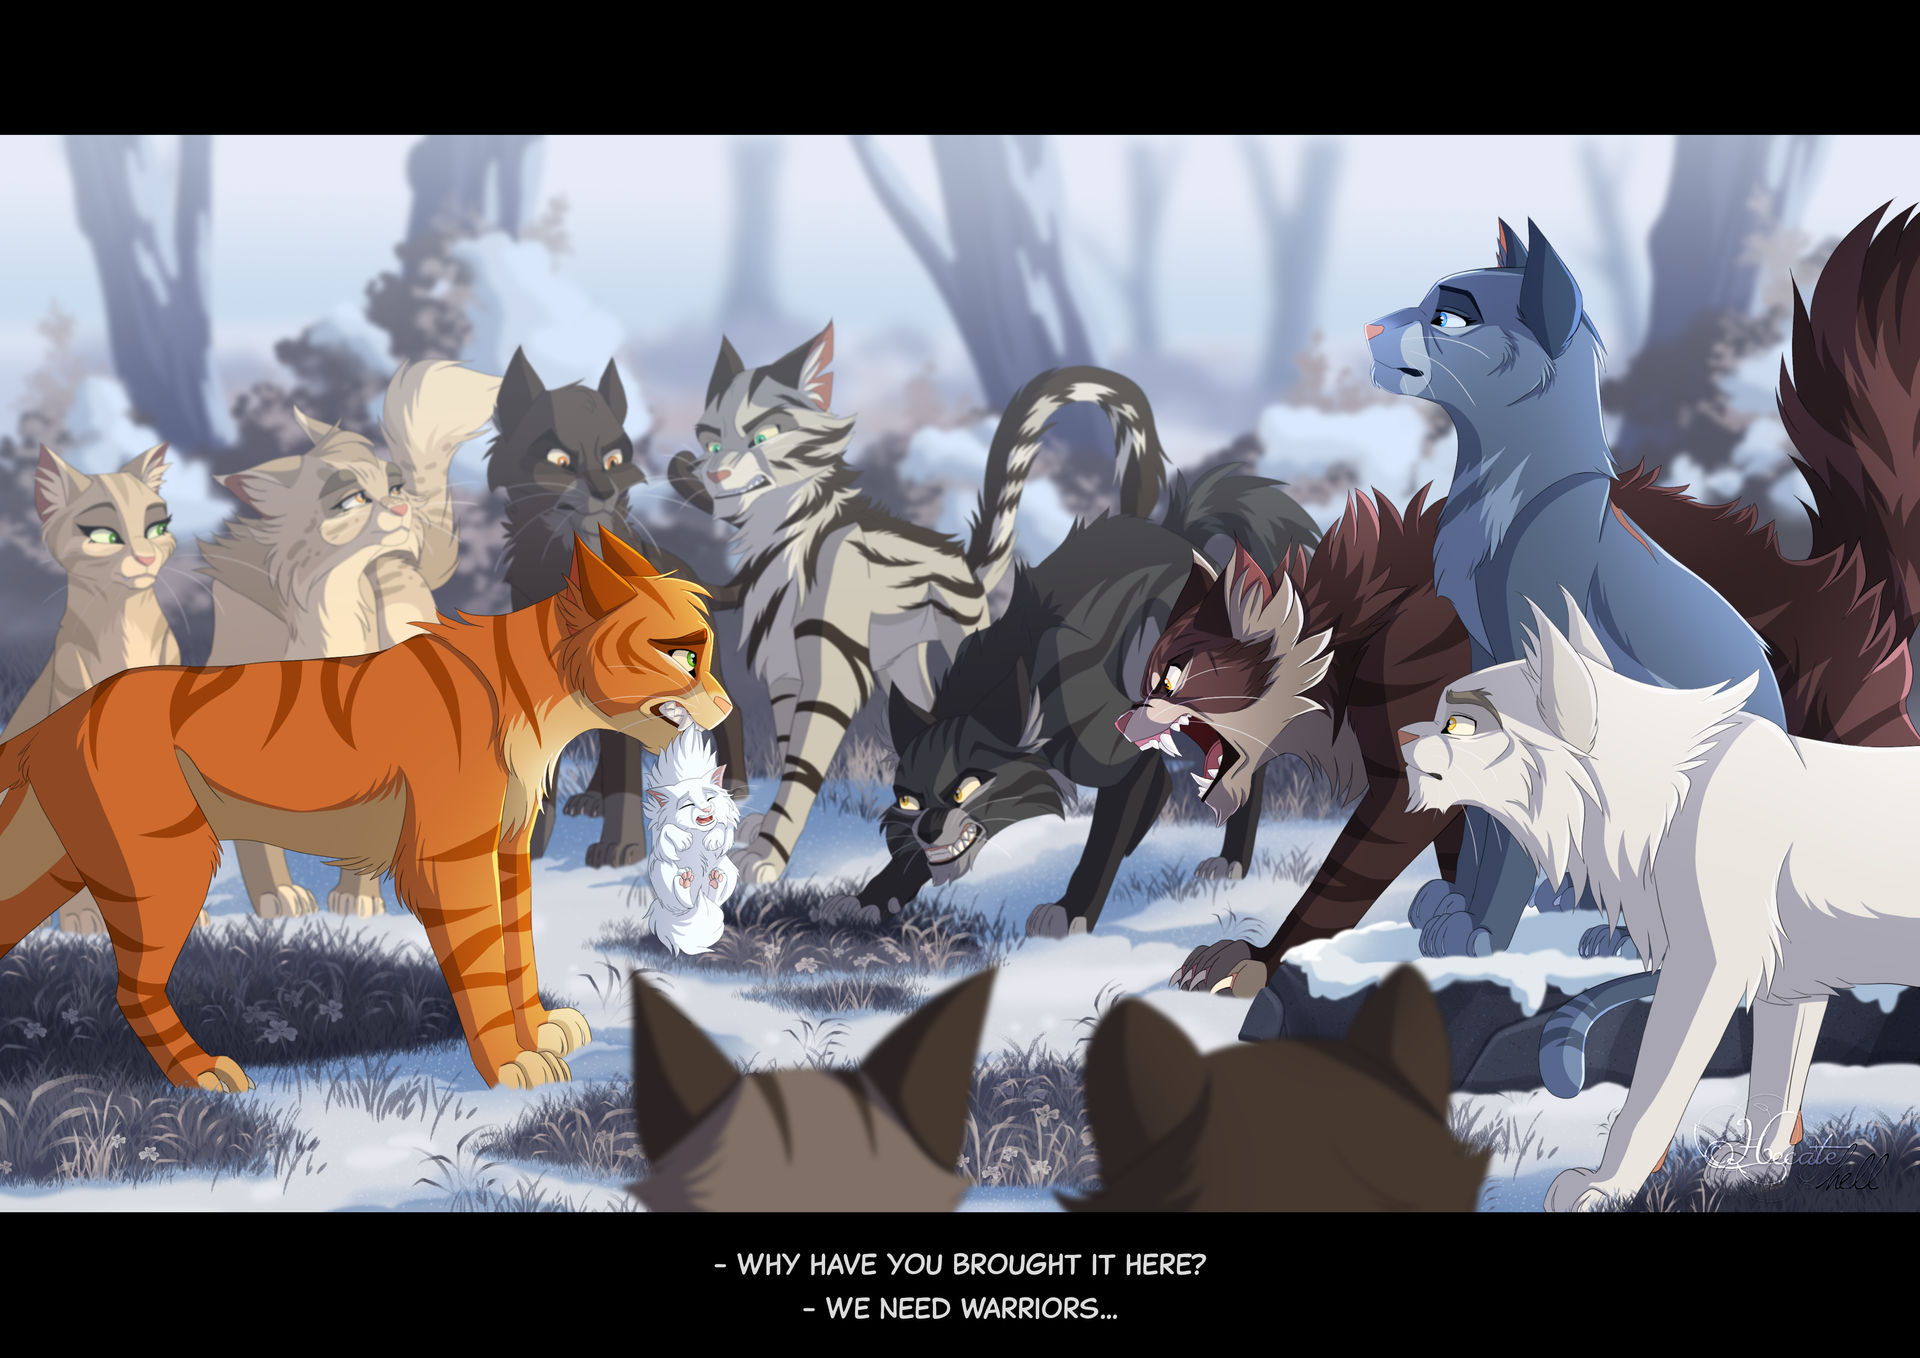 Warrior cats - wind clan boys by hecatehell on DeviantArt